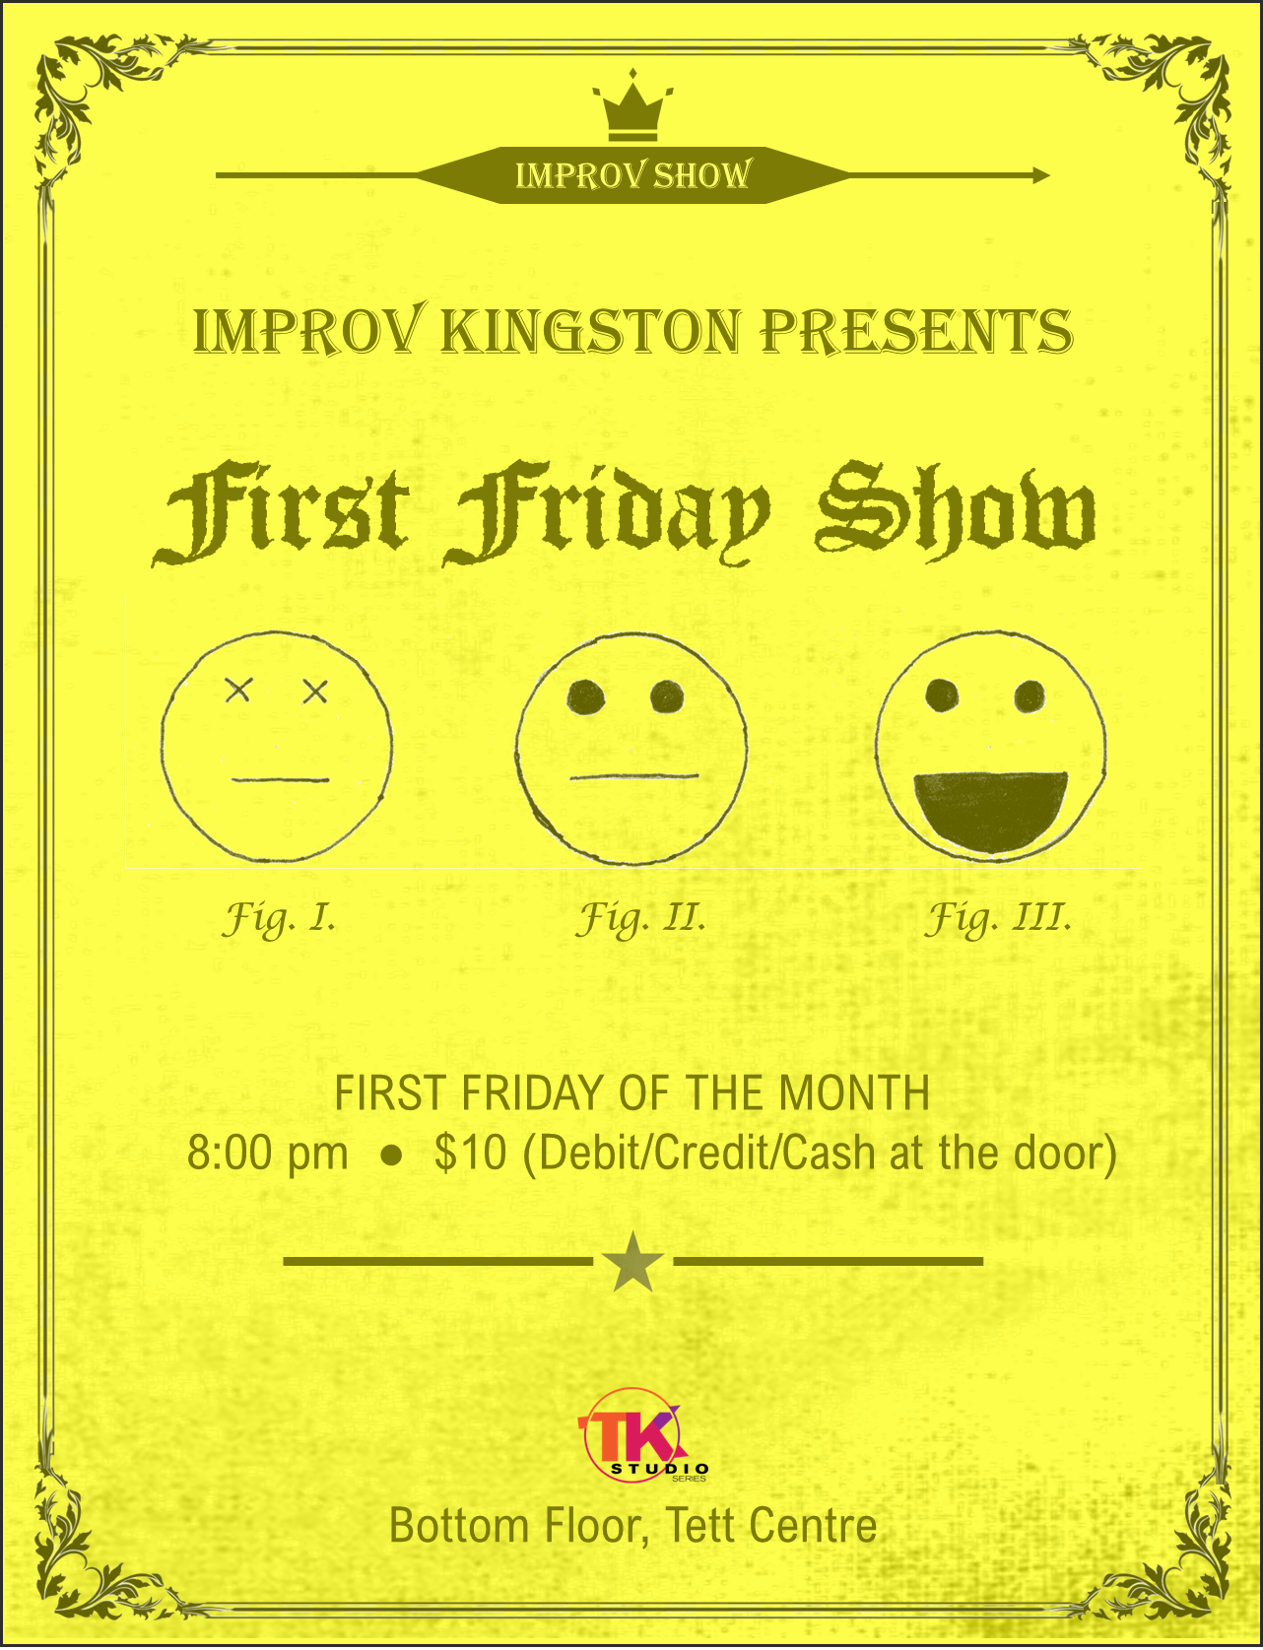 Poster for Improv Kingston's 'First Friday Show'. The company, title, date, time, location, and ticket price are noted.